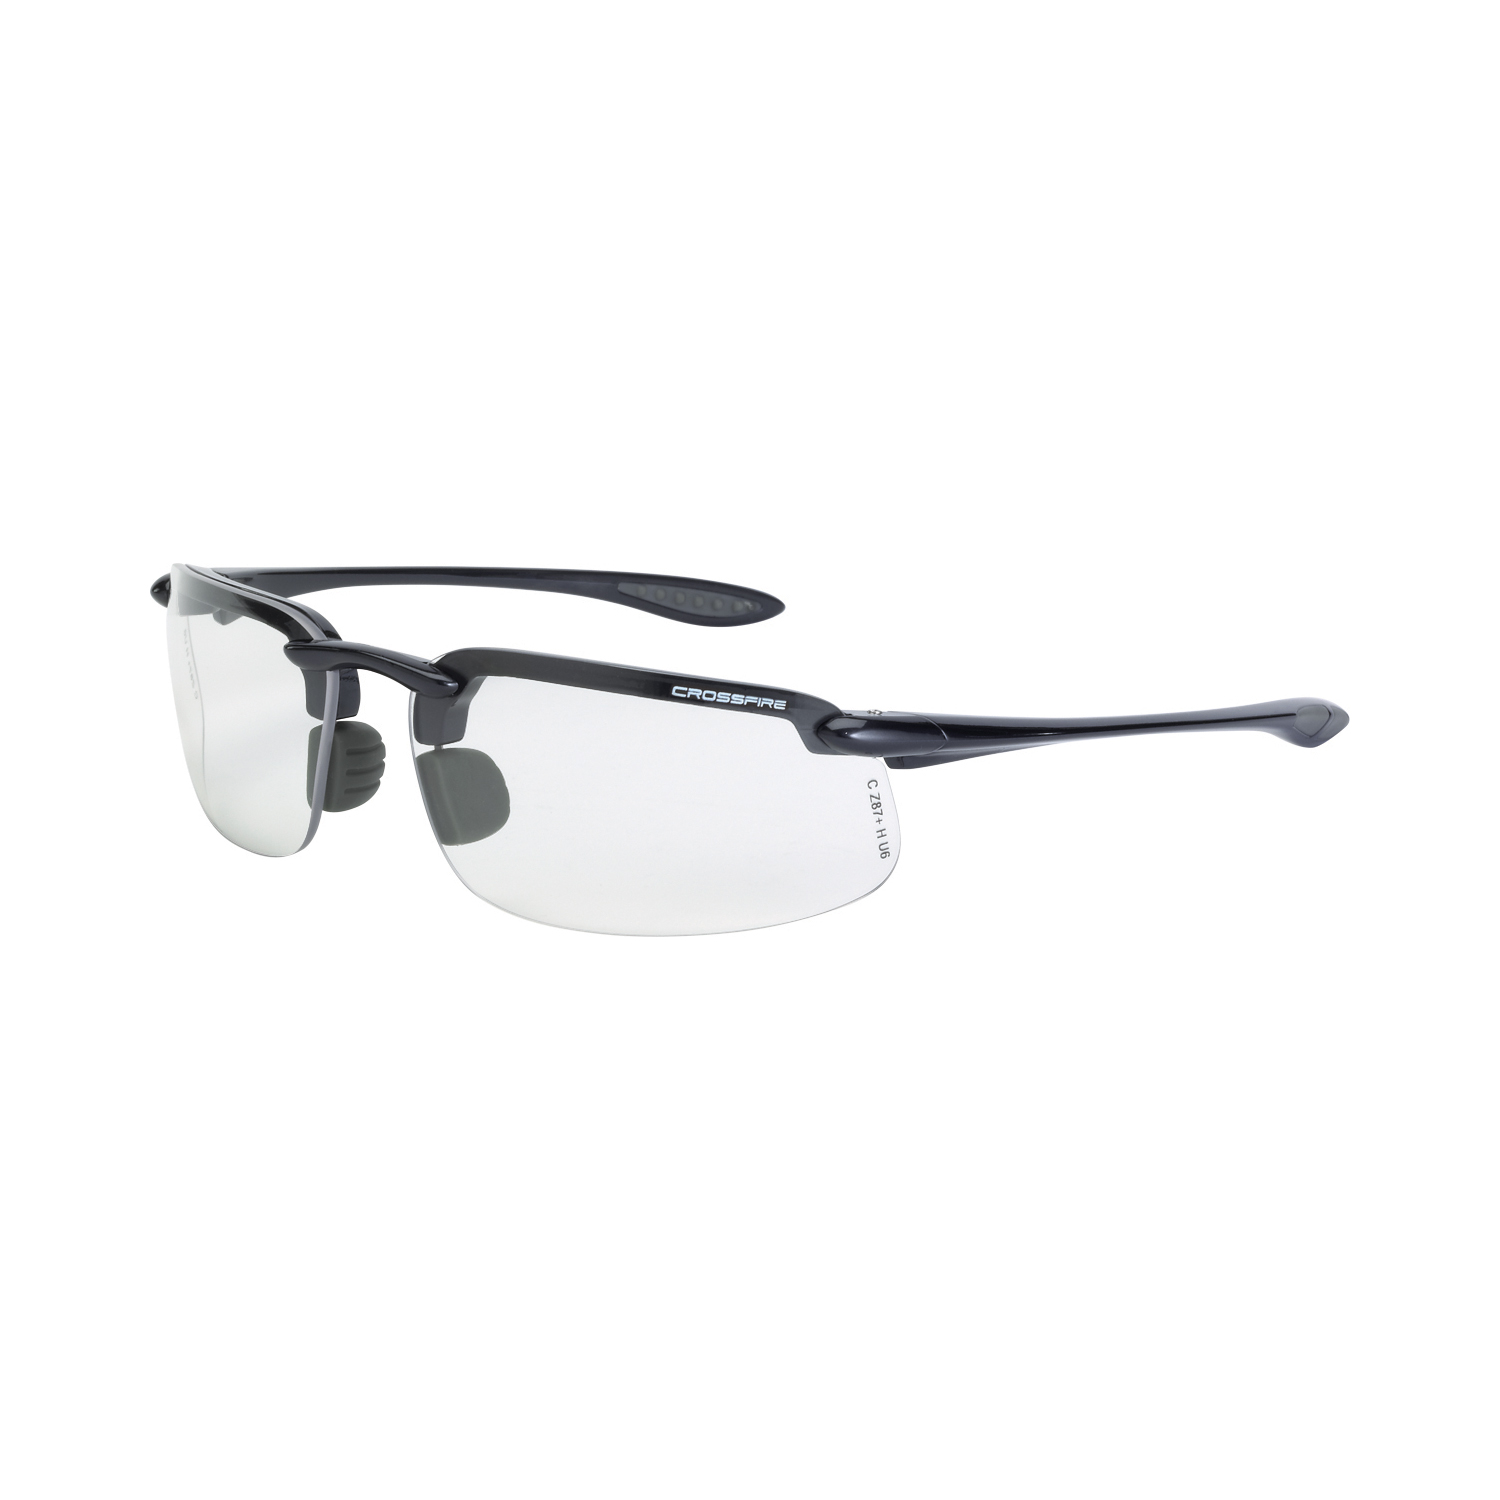 Crossfire ES4 Fire Red Mirror High Definition Safety Glasses Sunglasses Z87.1